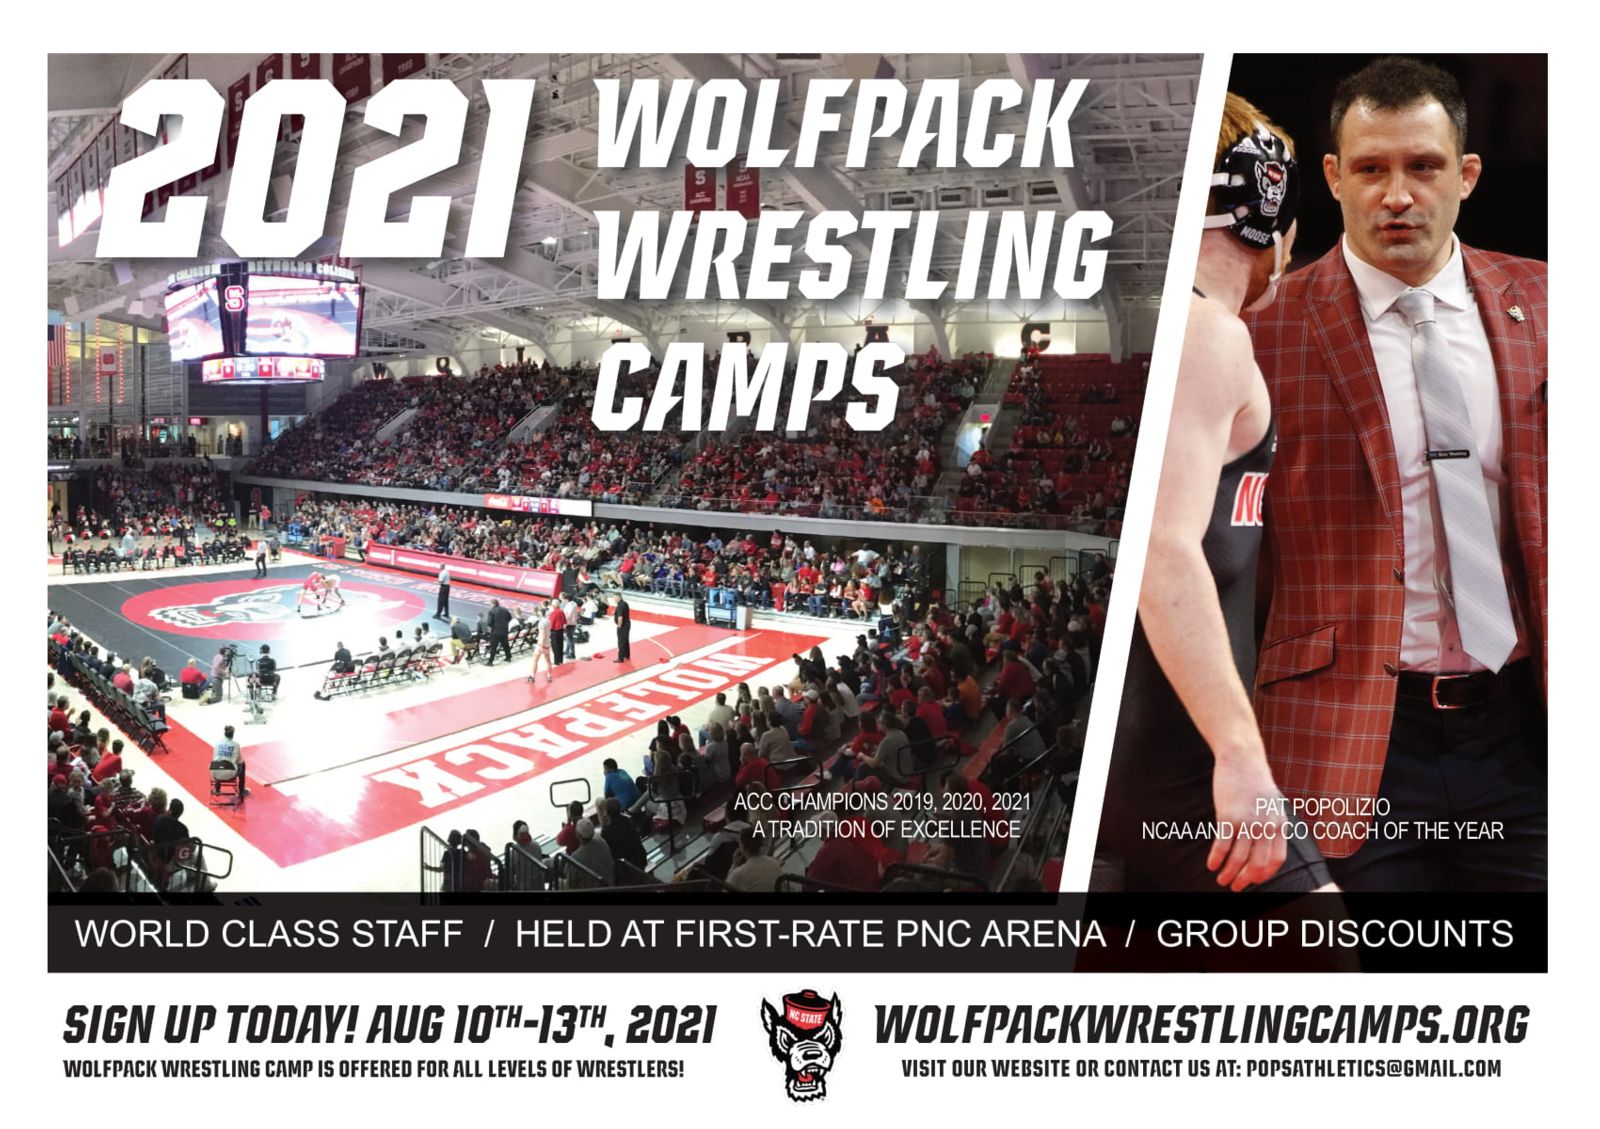 Wolfpack Wrestling Camps powered by Oasys Sports